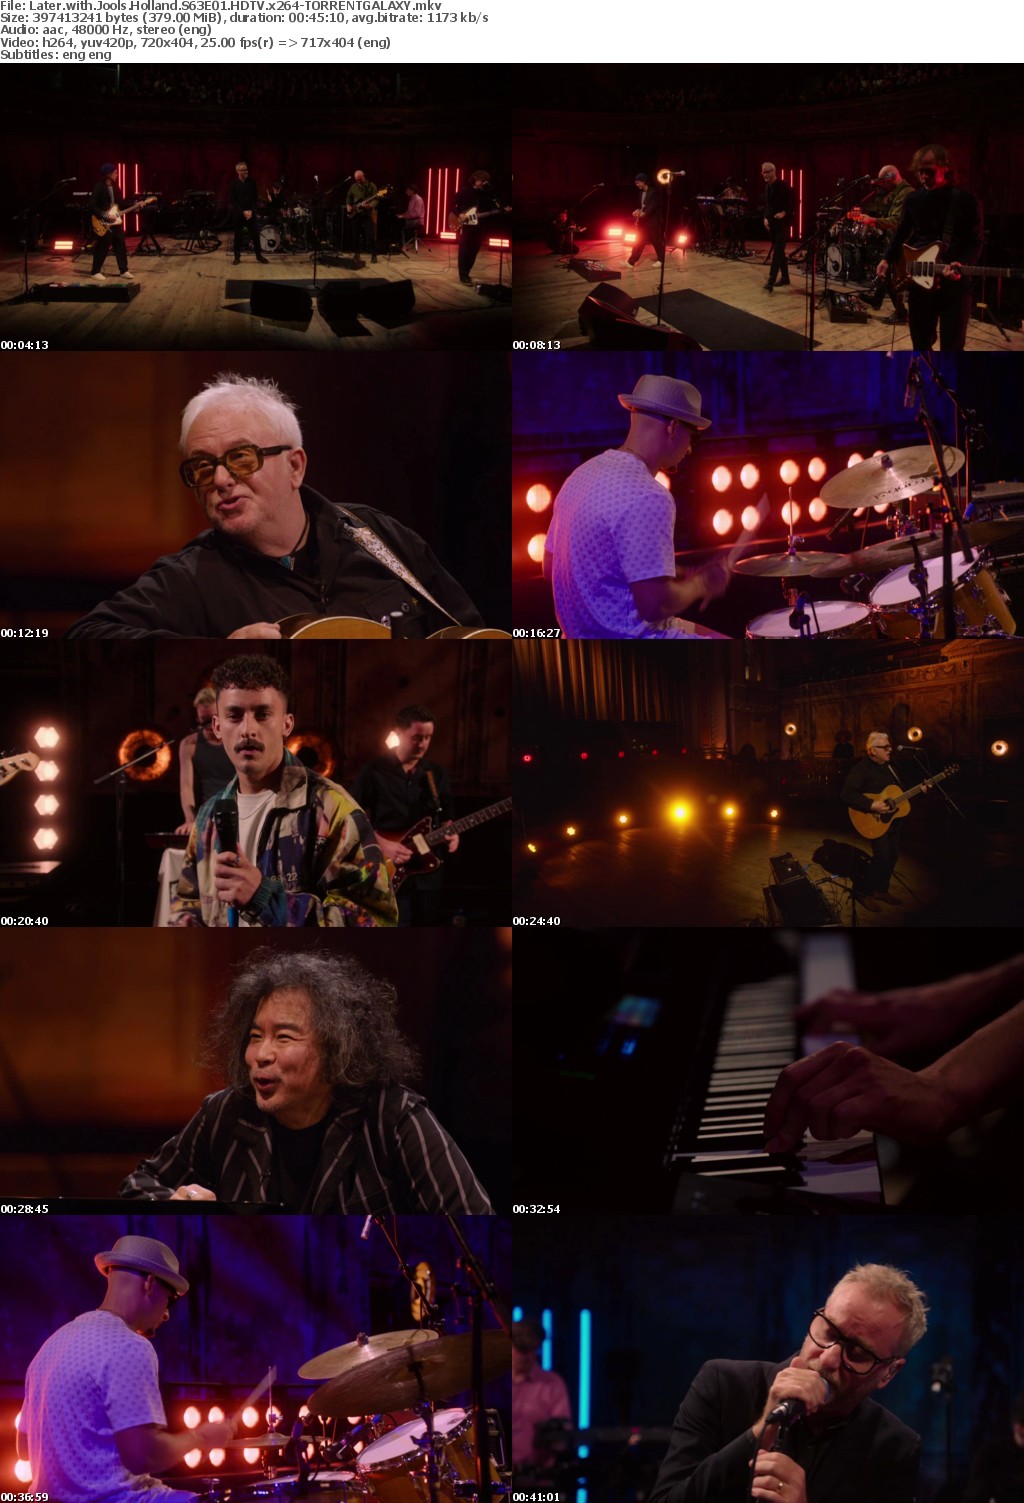 Later with Jools Holland S63E01 HDTV x264-GALAXY